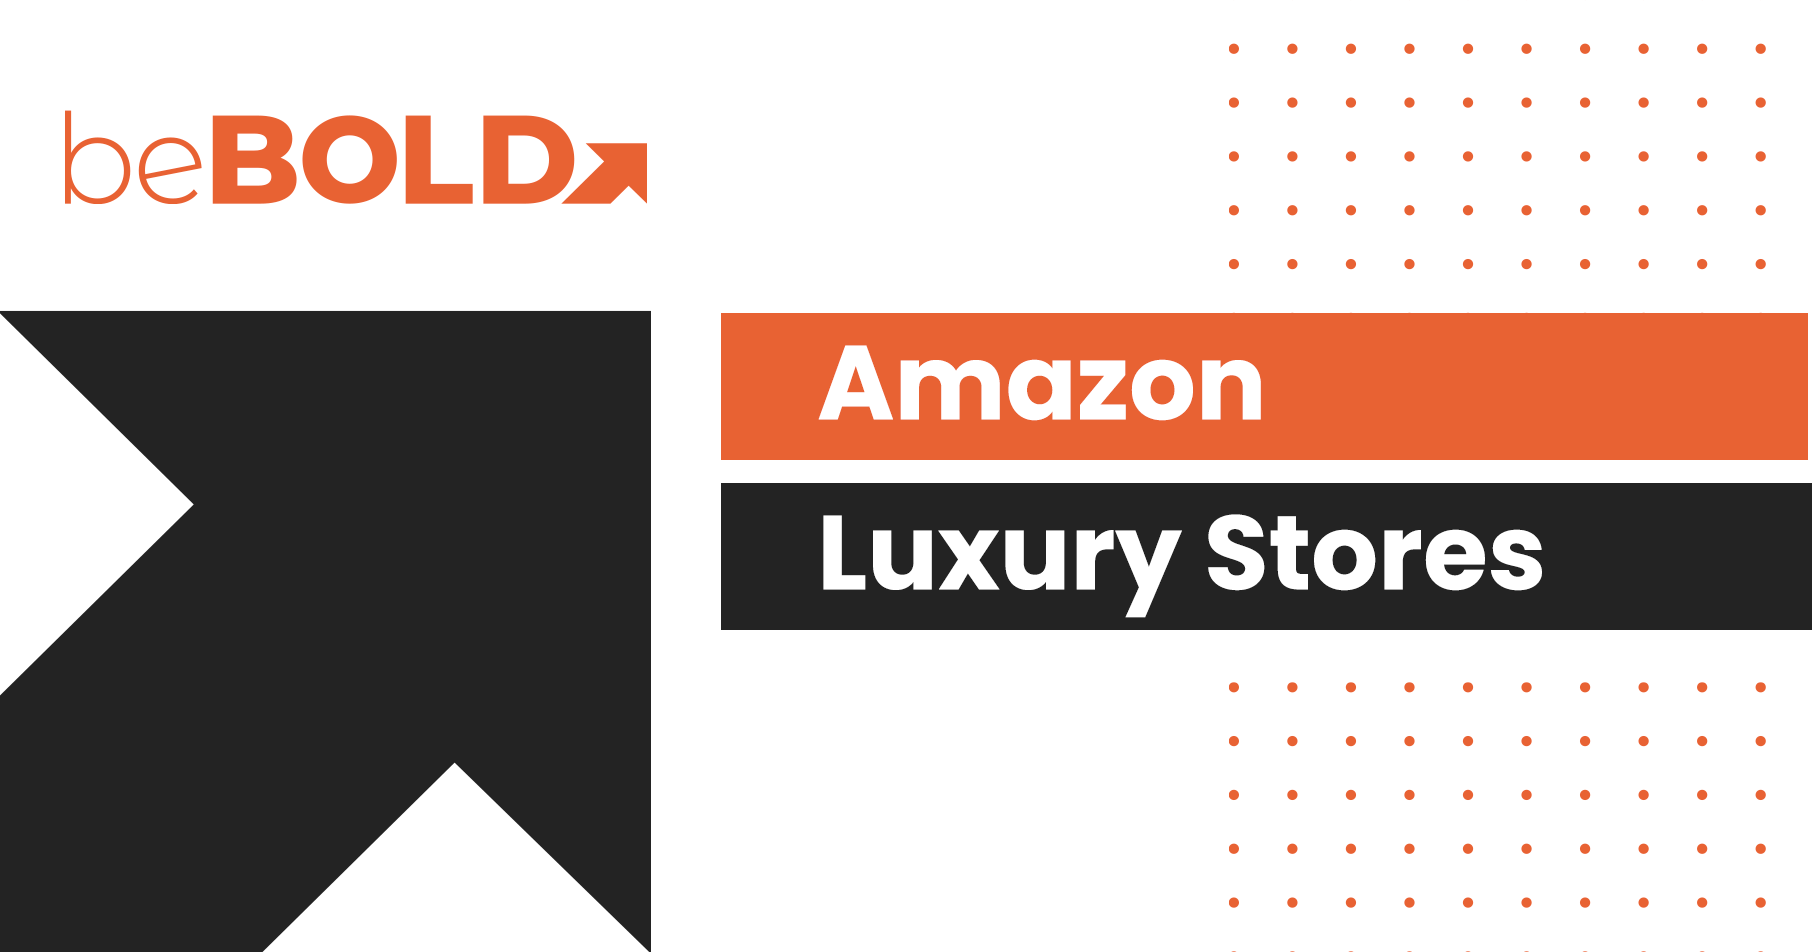 Amazon Luxury Stores: Ultimate Guide to Luxury Fashion & Beauty Brands